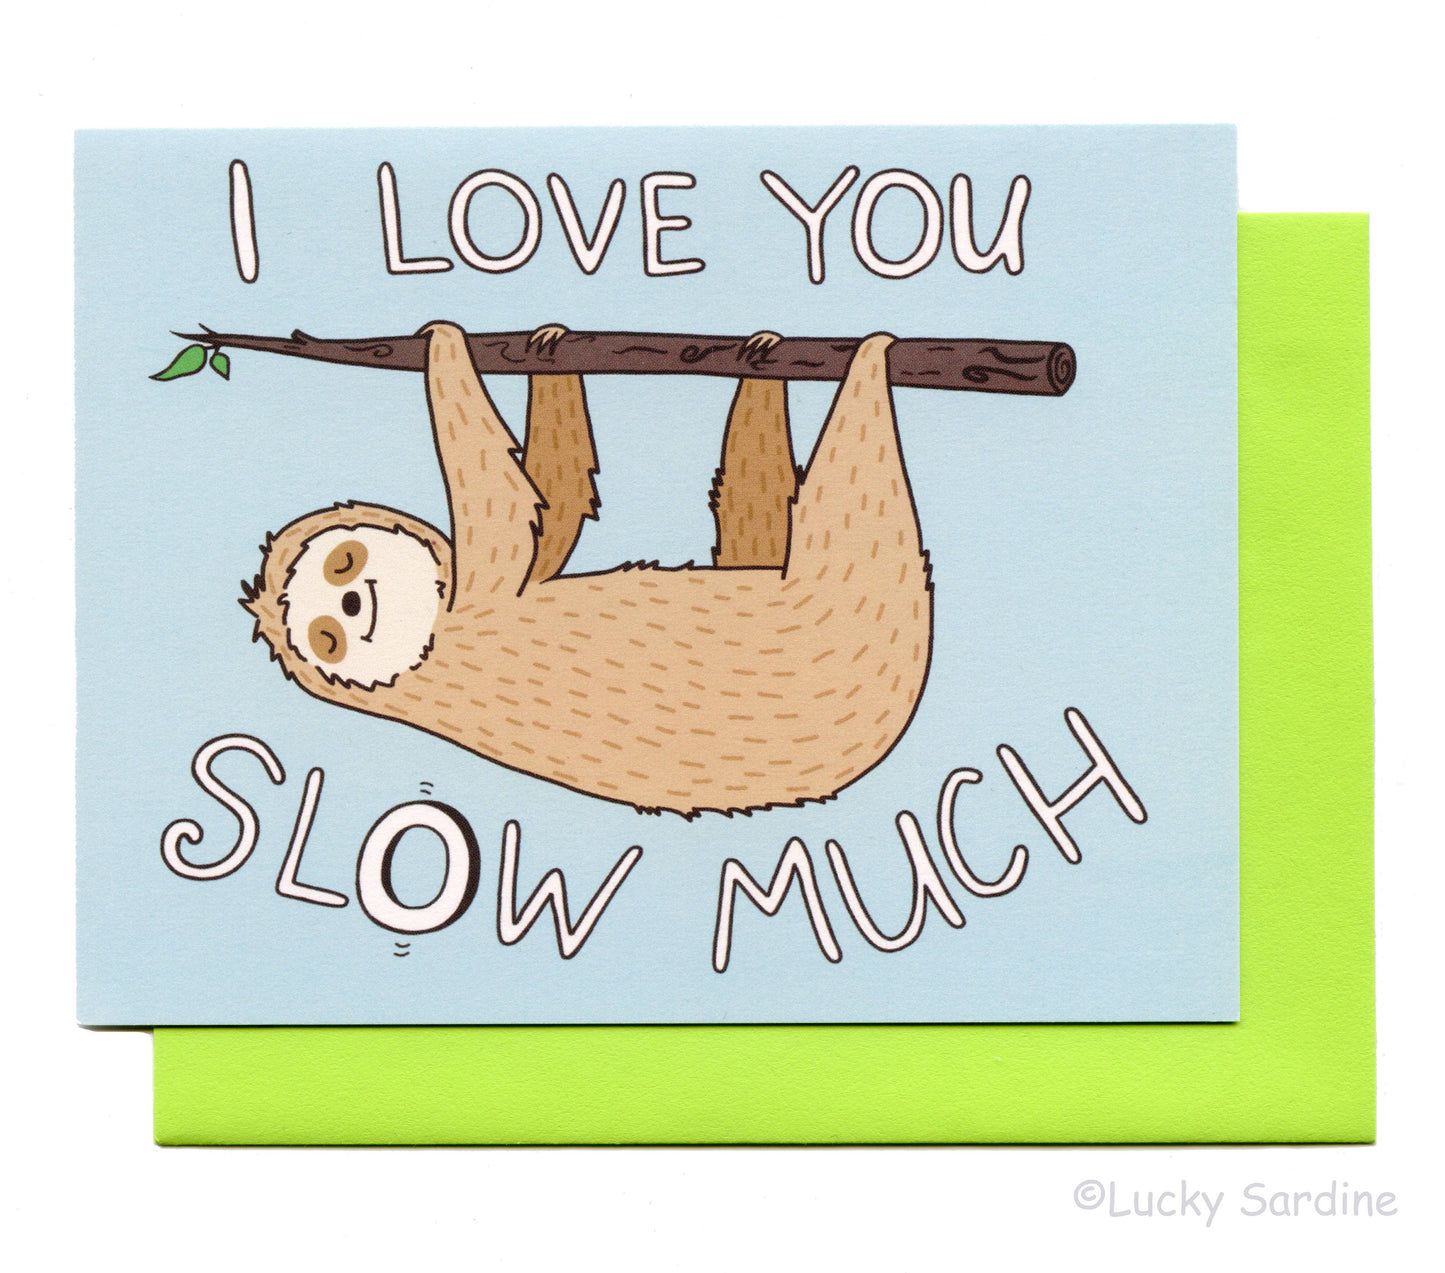 I Love You Slow Much Sloth Greeting Card: Lime Green